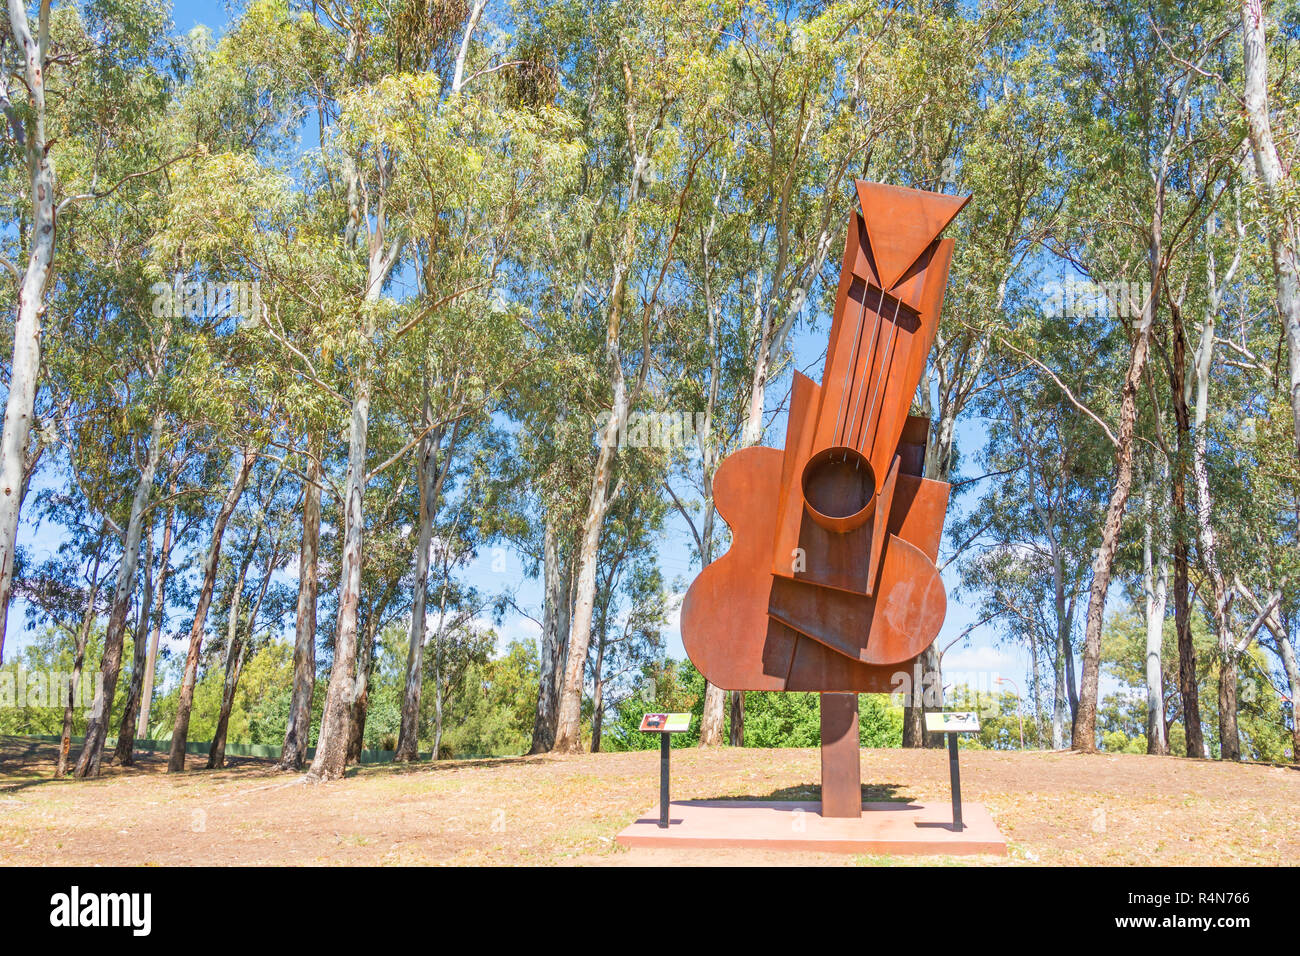 A Corten Steel Picasso Guitar sculpture by Peter Hooper in 2016 on display in Tamworth Bicentennial Park NSW Australia. Stock Photo